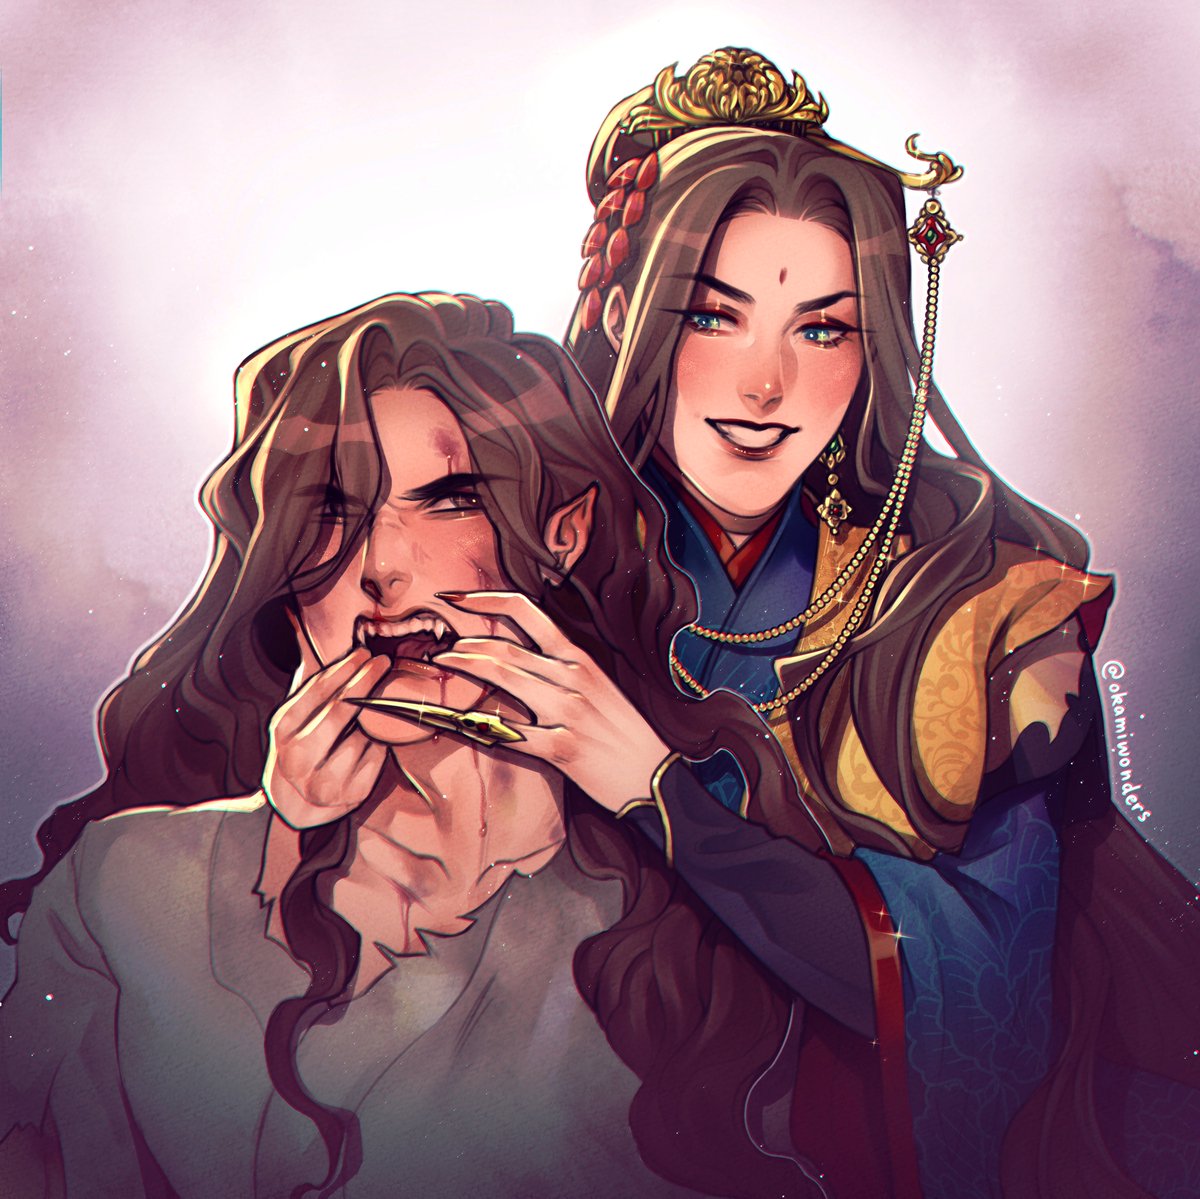 Hello, twitter! Long time no see! I'd like to say I'm still alive, life has just been very demanding 😂

I had the honour of working with @viceforgotten for the @BingqiuMinibang! If you like Bingjiu, please go read her amazing fic! ♥

#BQRMB2023 #svsss #bingqiu